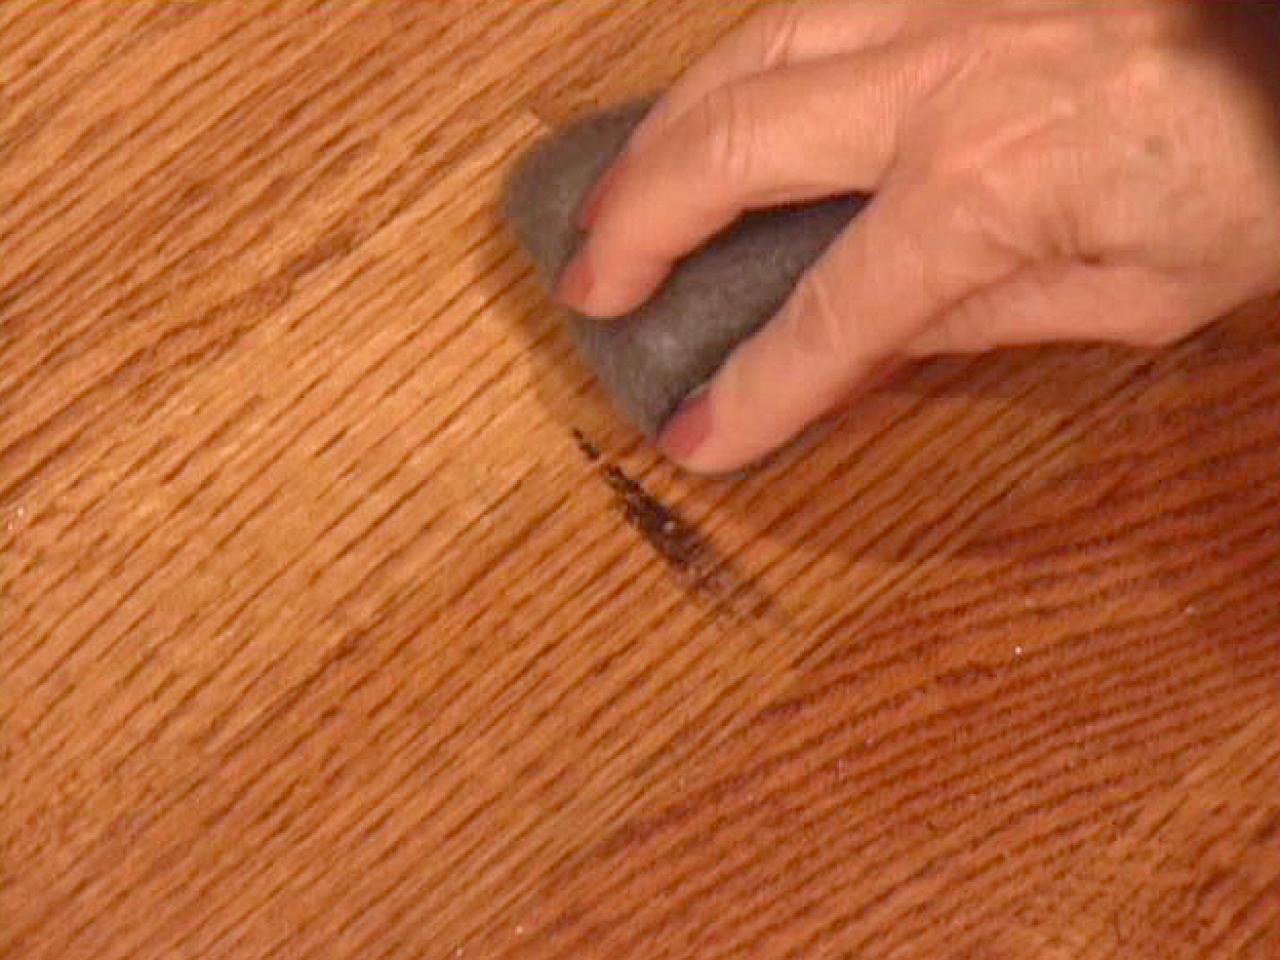 How To Touch Up Wood Floors Tos Diy, How To Repair Finish On Hardwood Floors